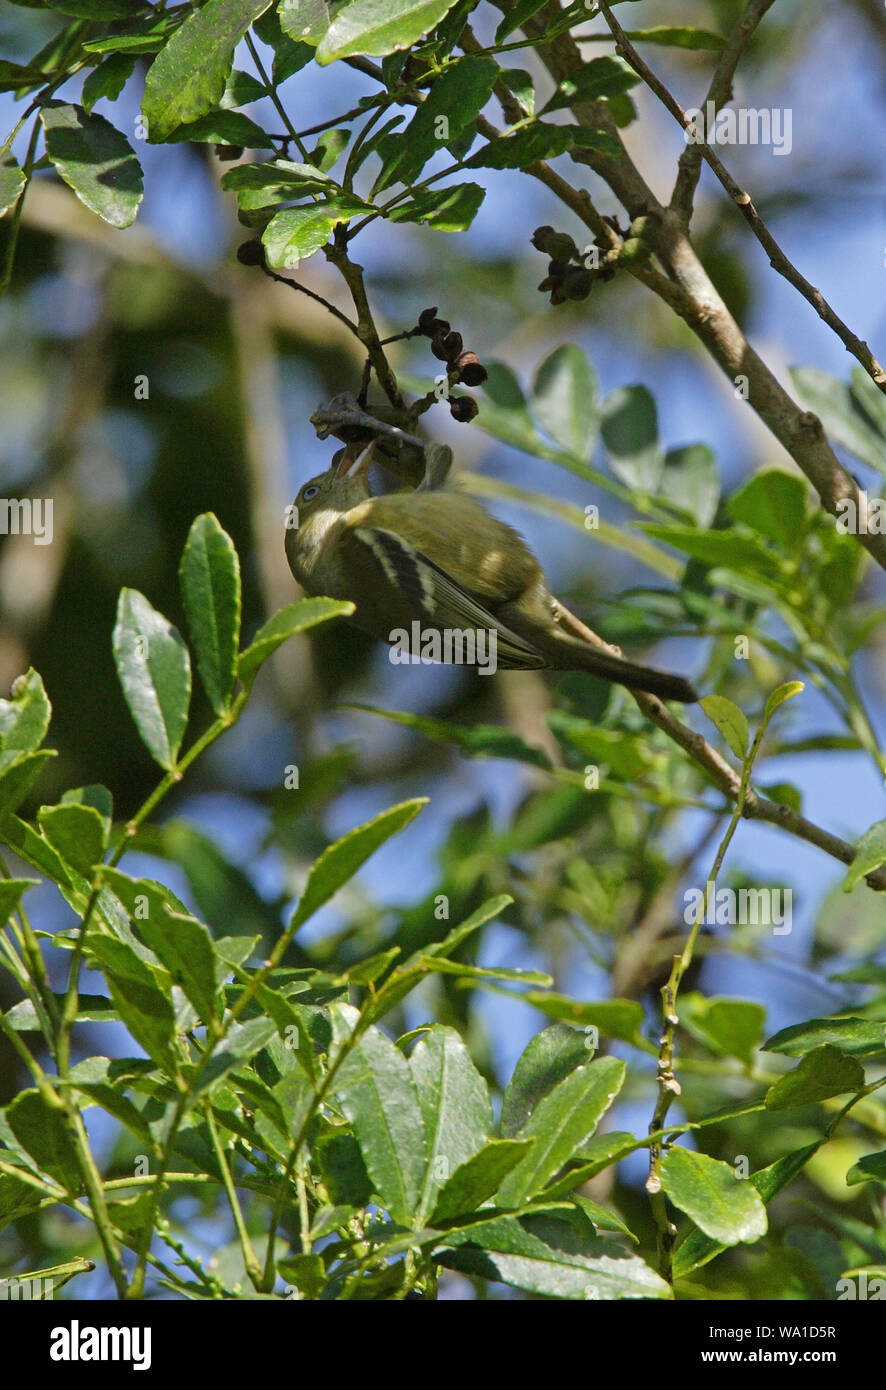 adult hanging upside down feeding in tree (Jamaican name 'Sewi-sewi')  Marshall's Pen, Jamaica          November 2008 Stock Photo